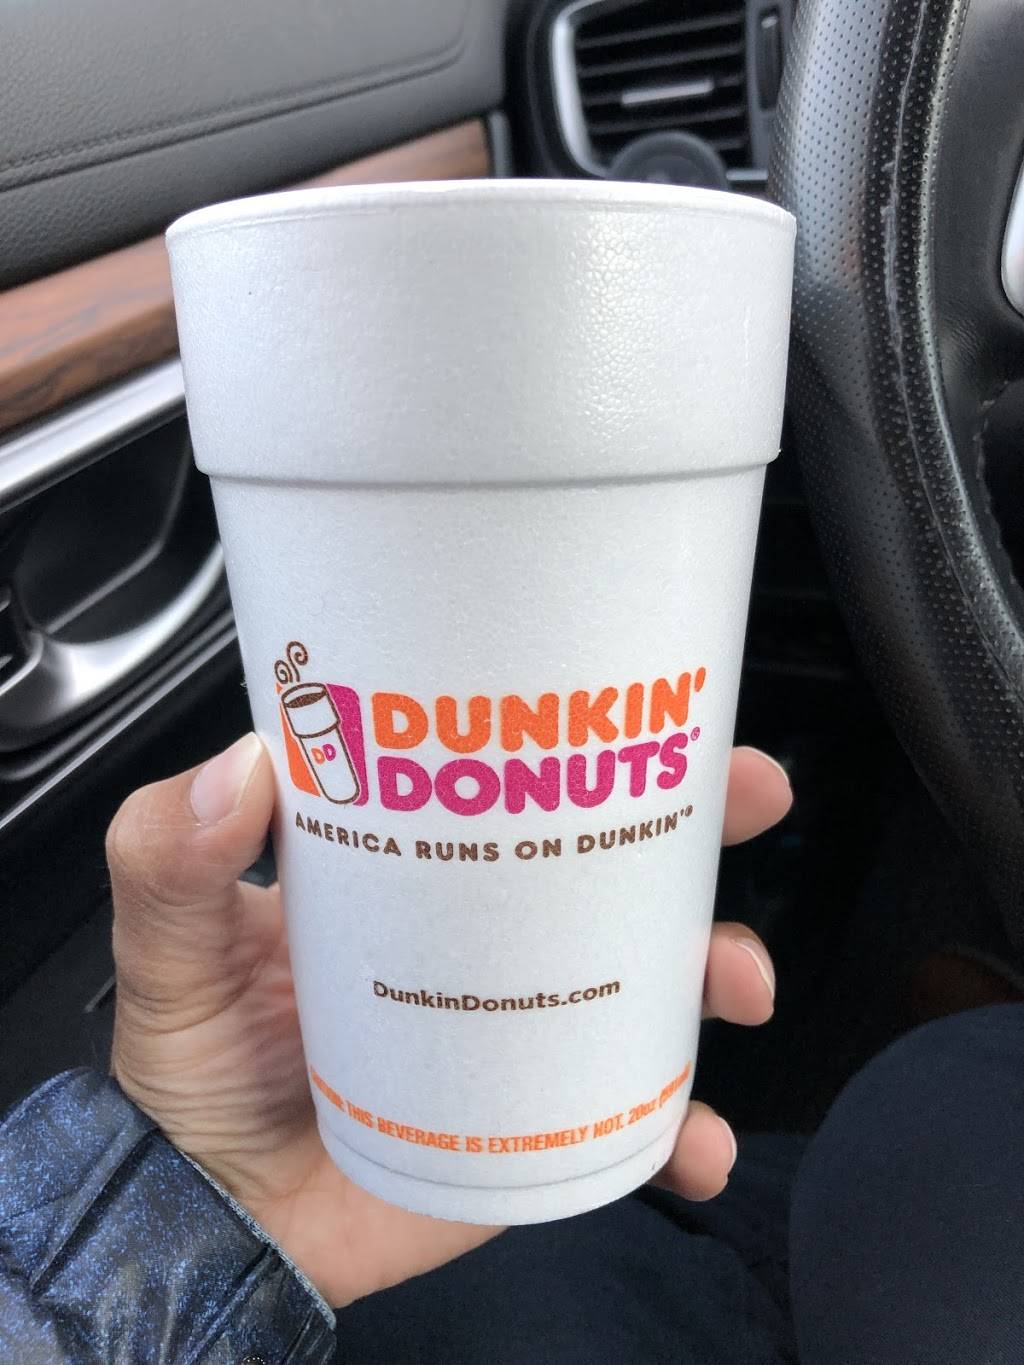 Dunkin Donuts | cafe | 183 12th St, Jersey City, NJ 07310, USA | 2016590777 OR +1 201-659-0777